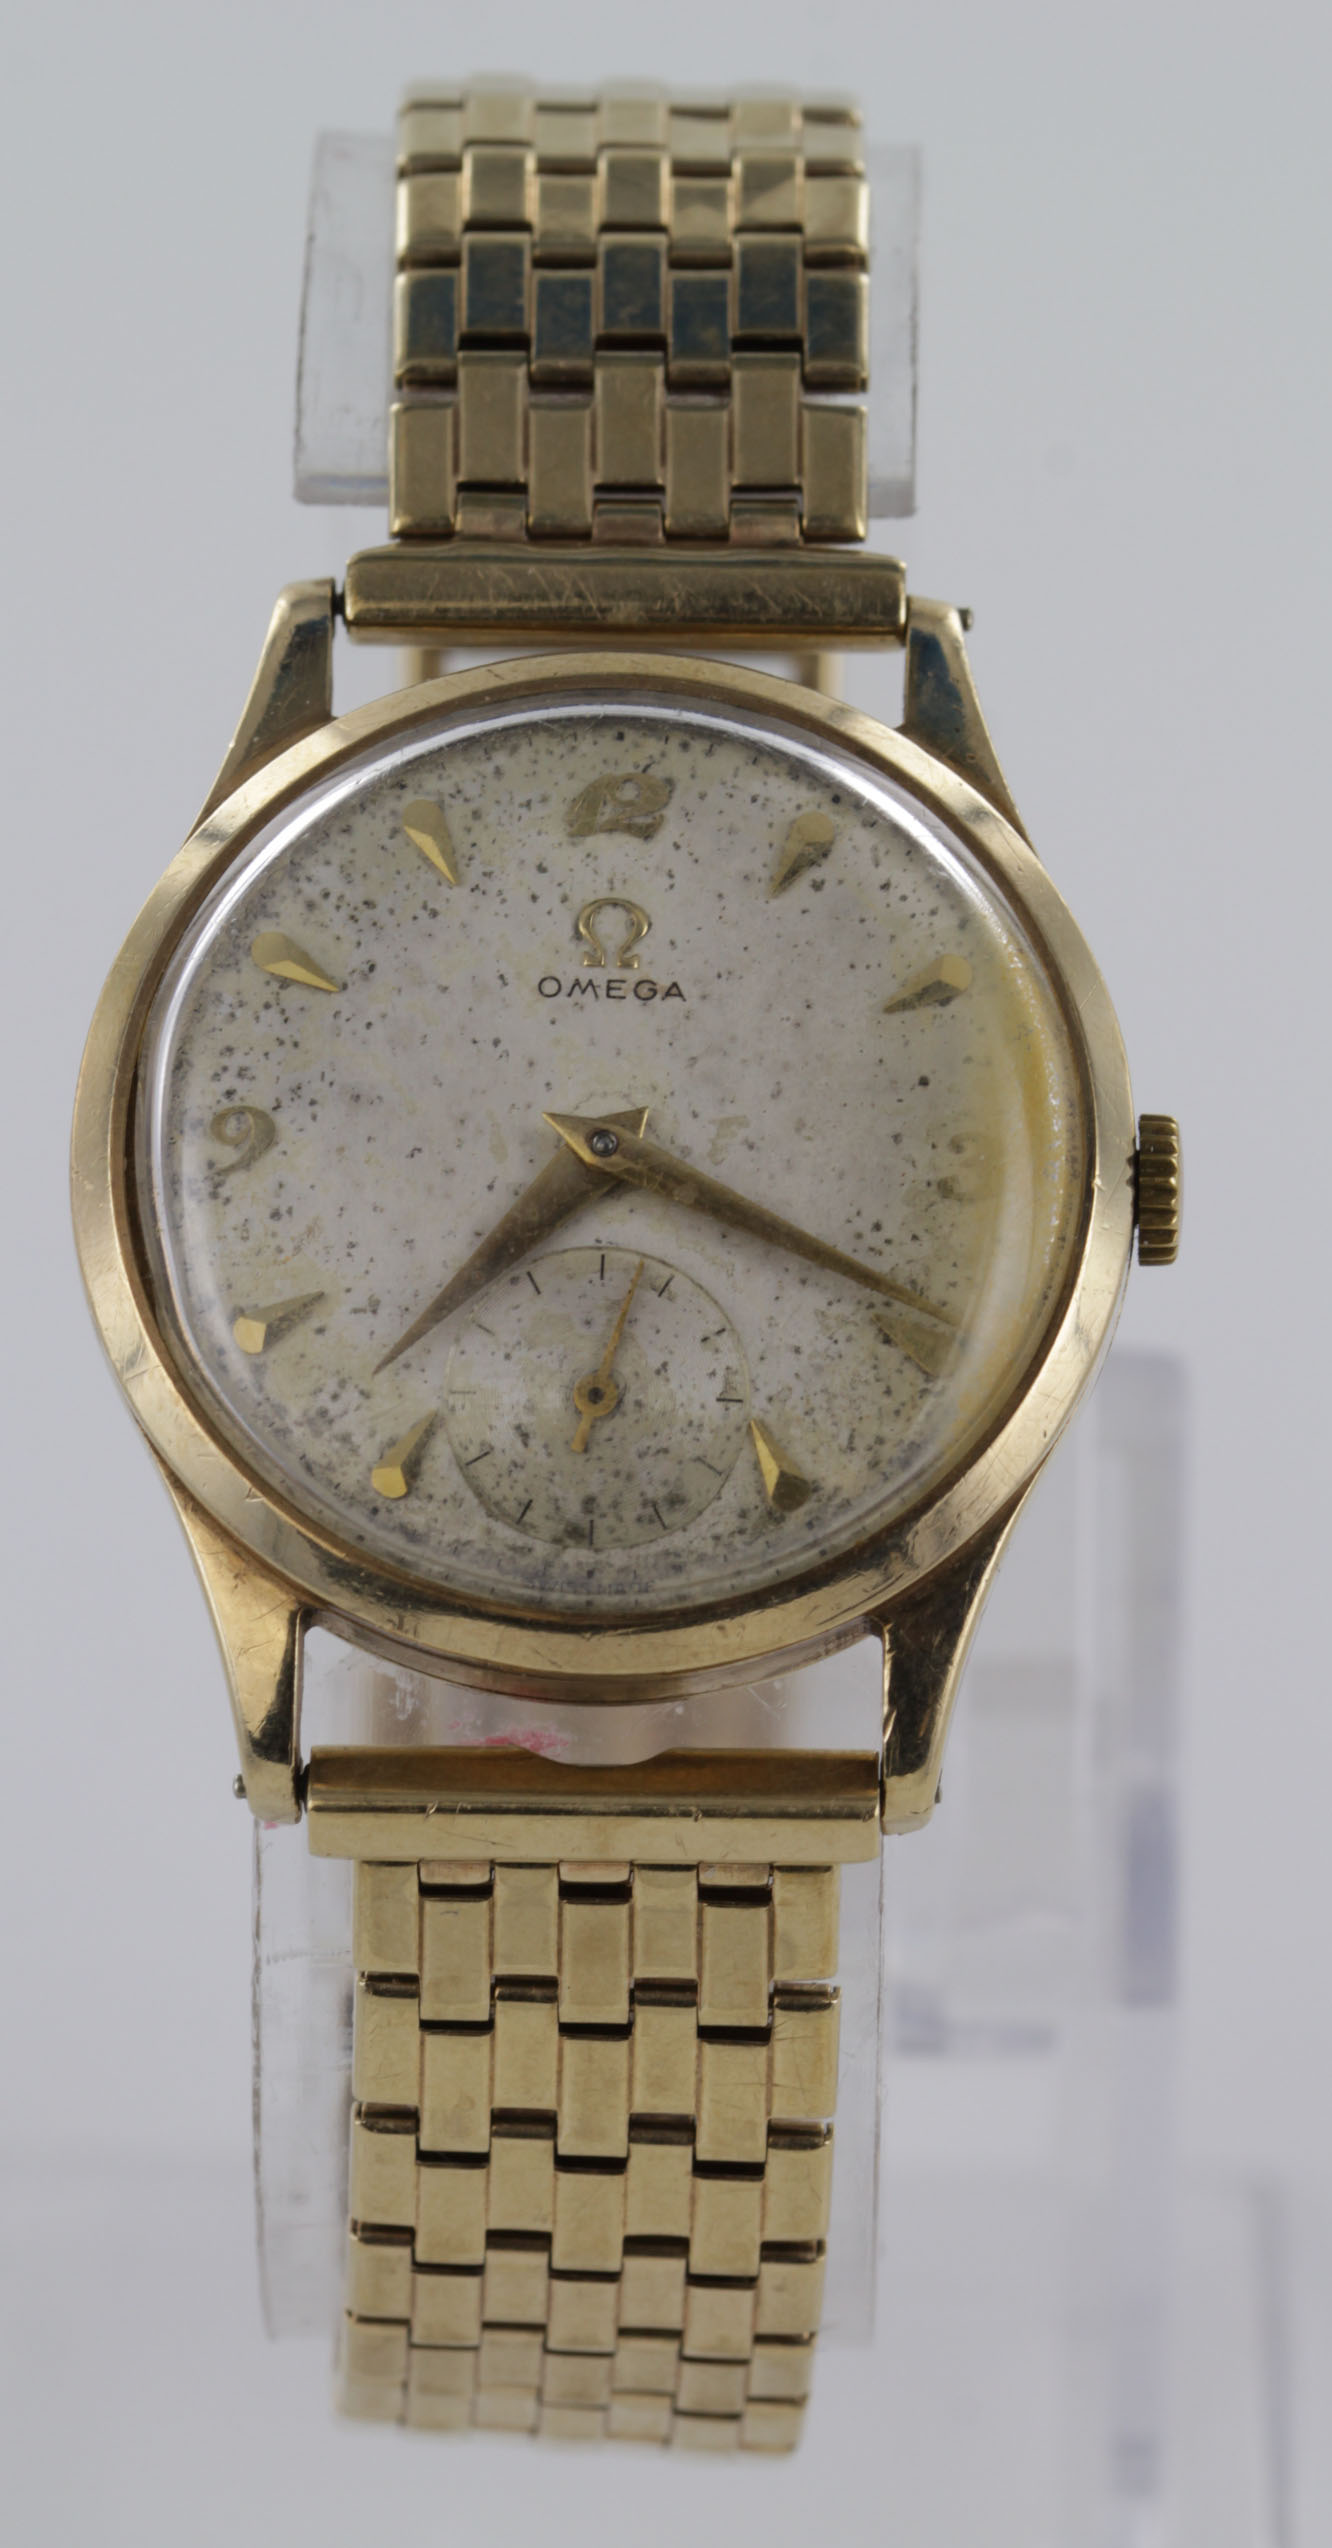 Gents 9ct cased Omega wristwatch circa 1950/52 (serial number 12995080) the cream dial (needs